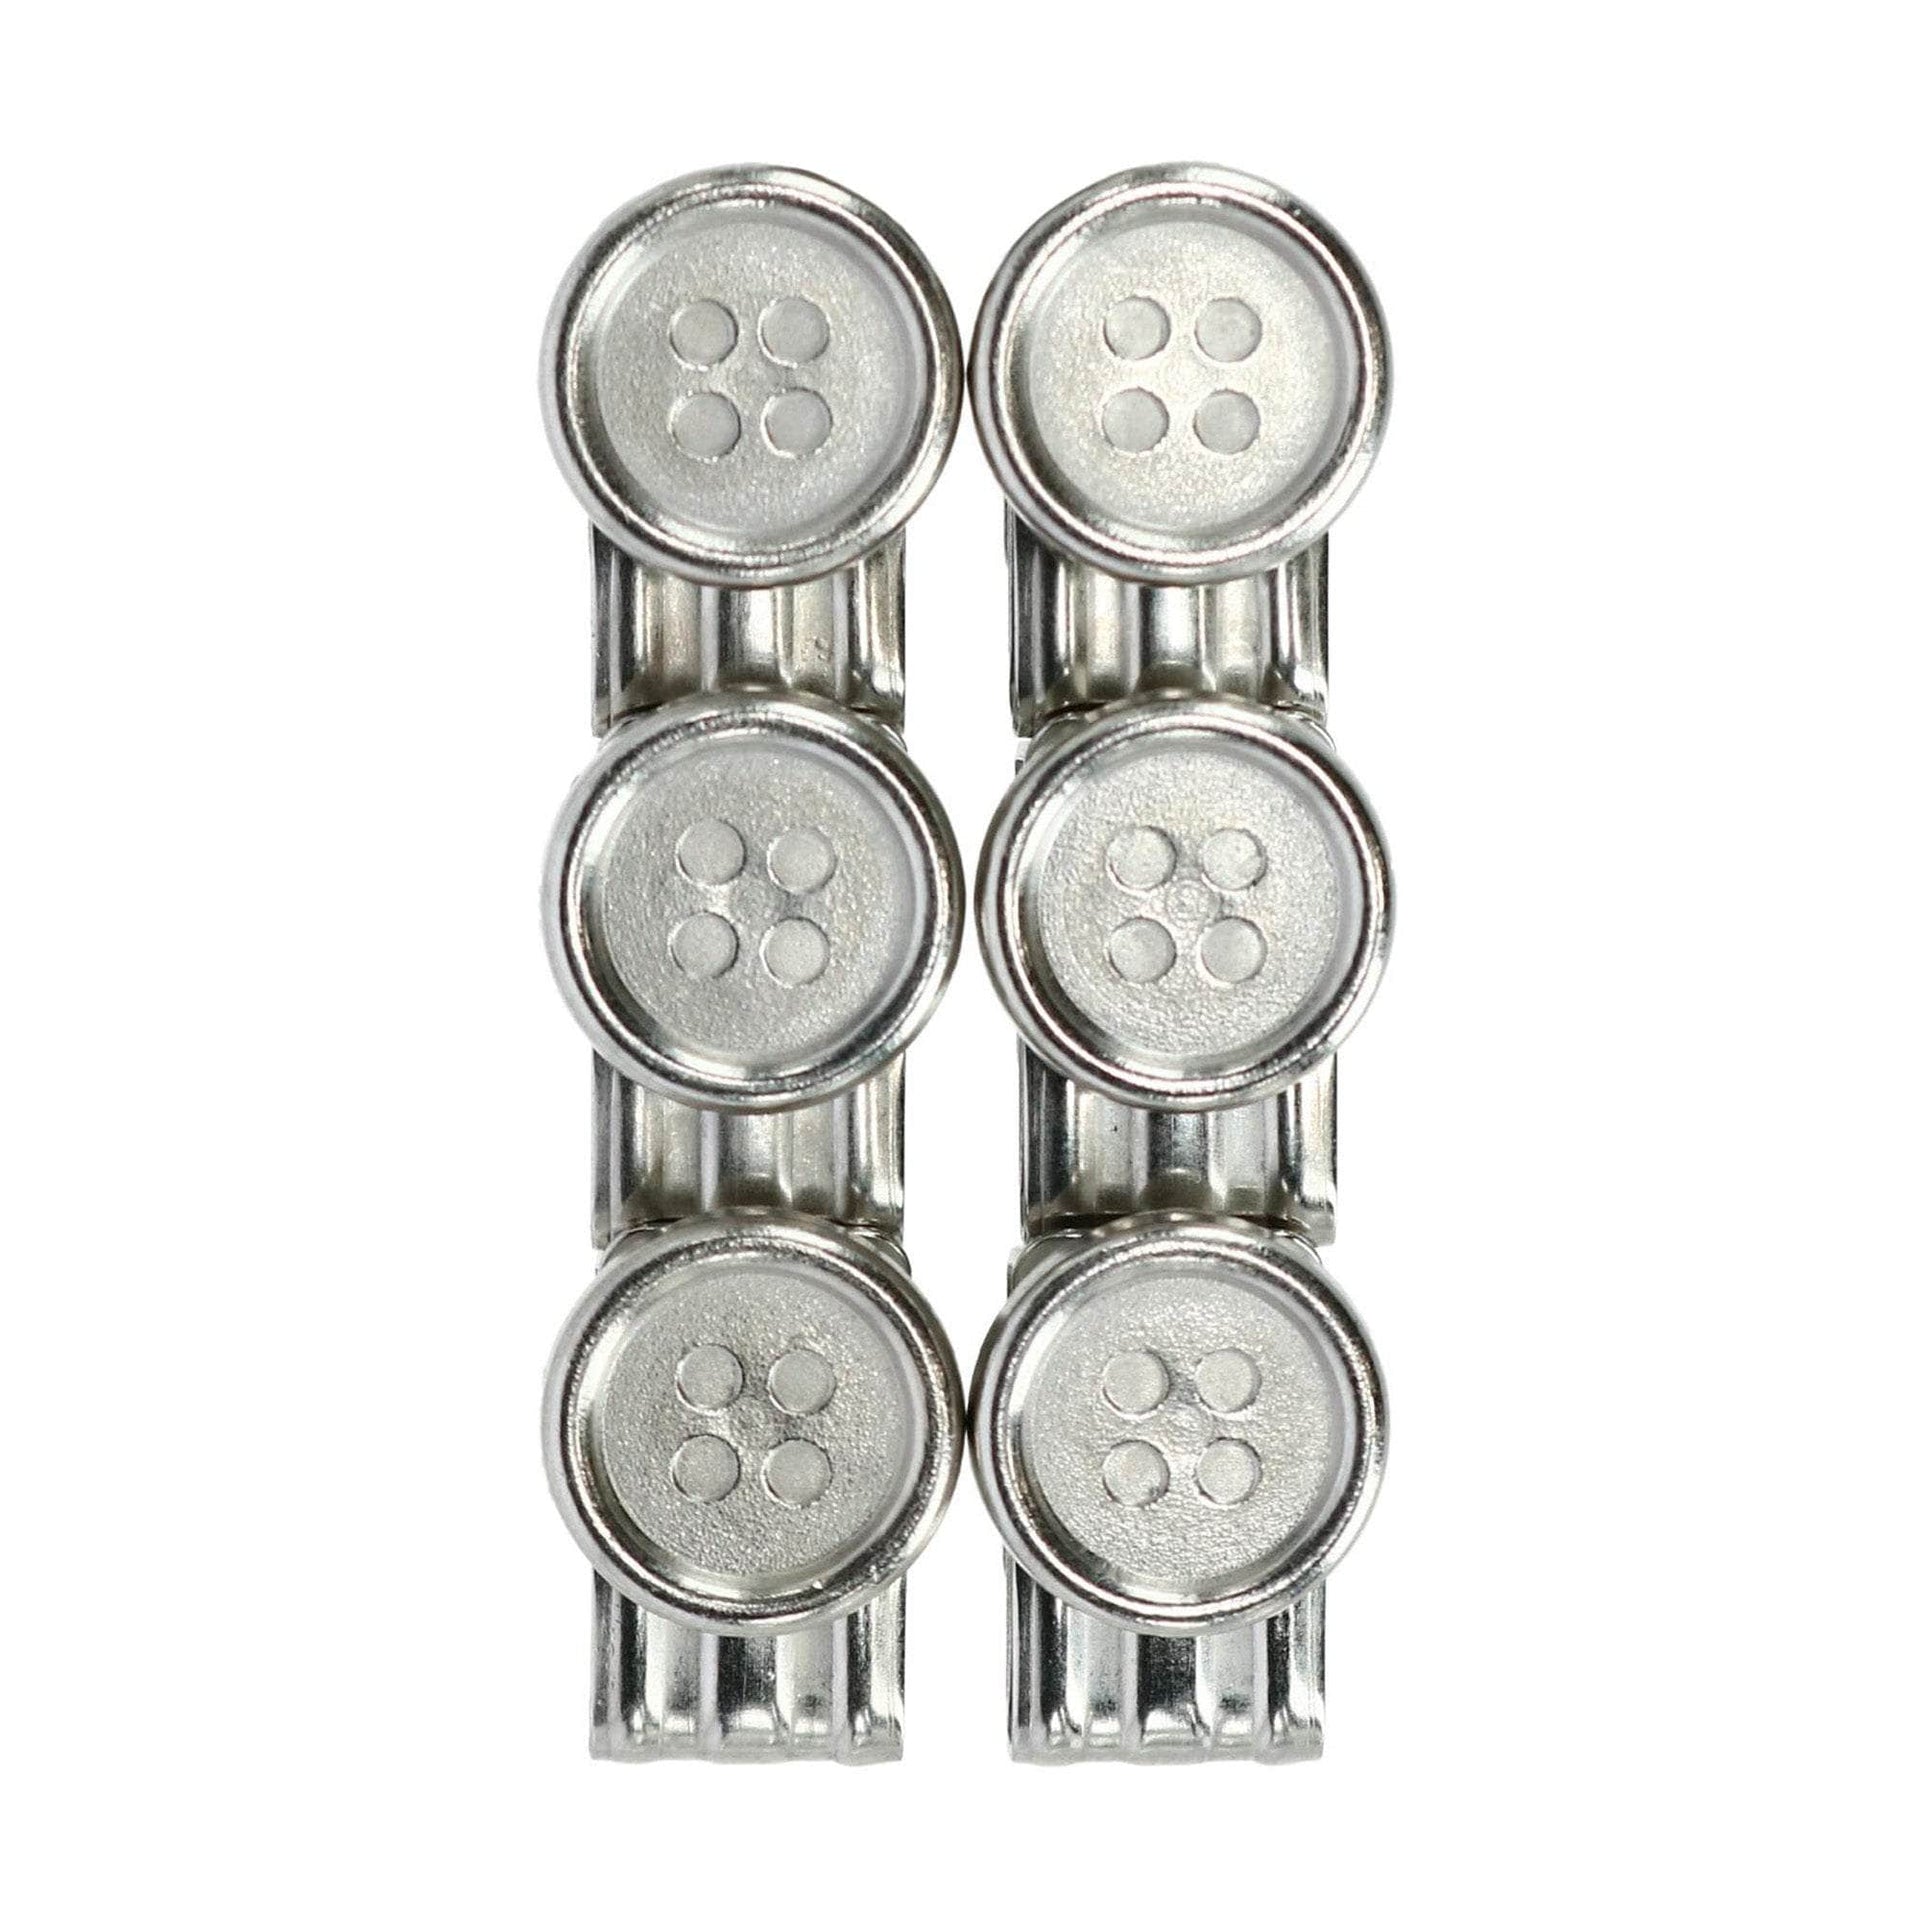 （Pack of 20）Replacement Suspender Buttons/No-Sew Dungaree Buttons/Metal  Button Snaps/Gripper Fasteners, Jean Rivets Studs for Mens/Womans Bachelor